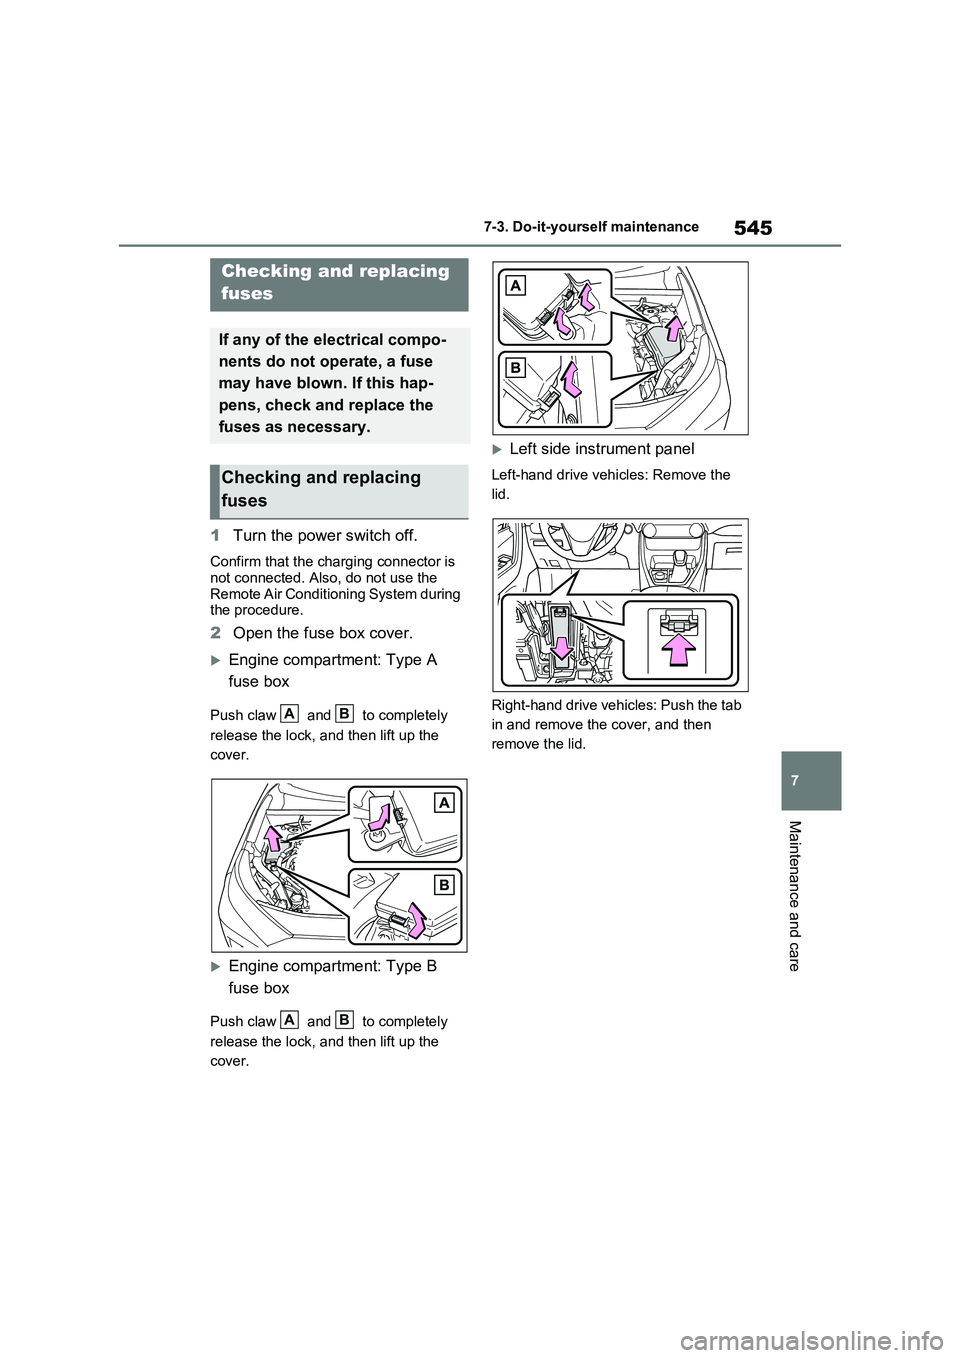 TOYOTA VERSO S 2011  Owners Manual 545
7 7-3. Do-it-yourself maintenance
Maintenance and care
1Turn the power switch off.
Confirm that the charging connector is 
not connected. Also, do not use the 
Remote Air Conditioning System durin